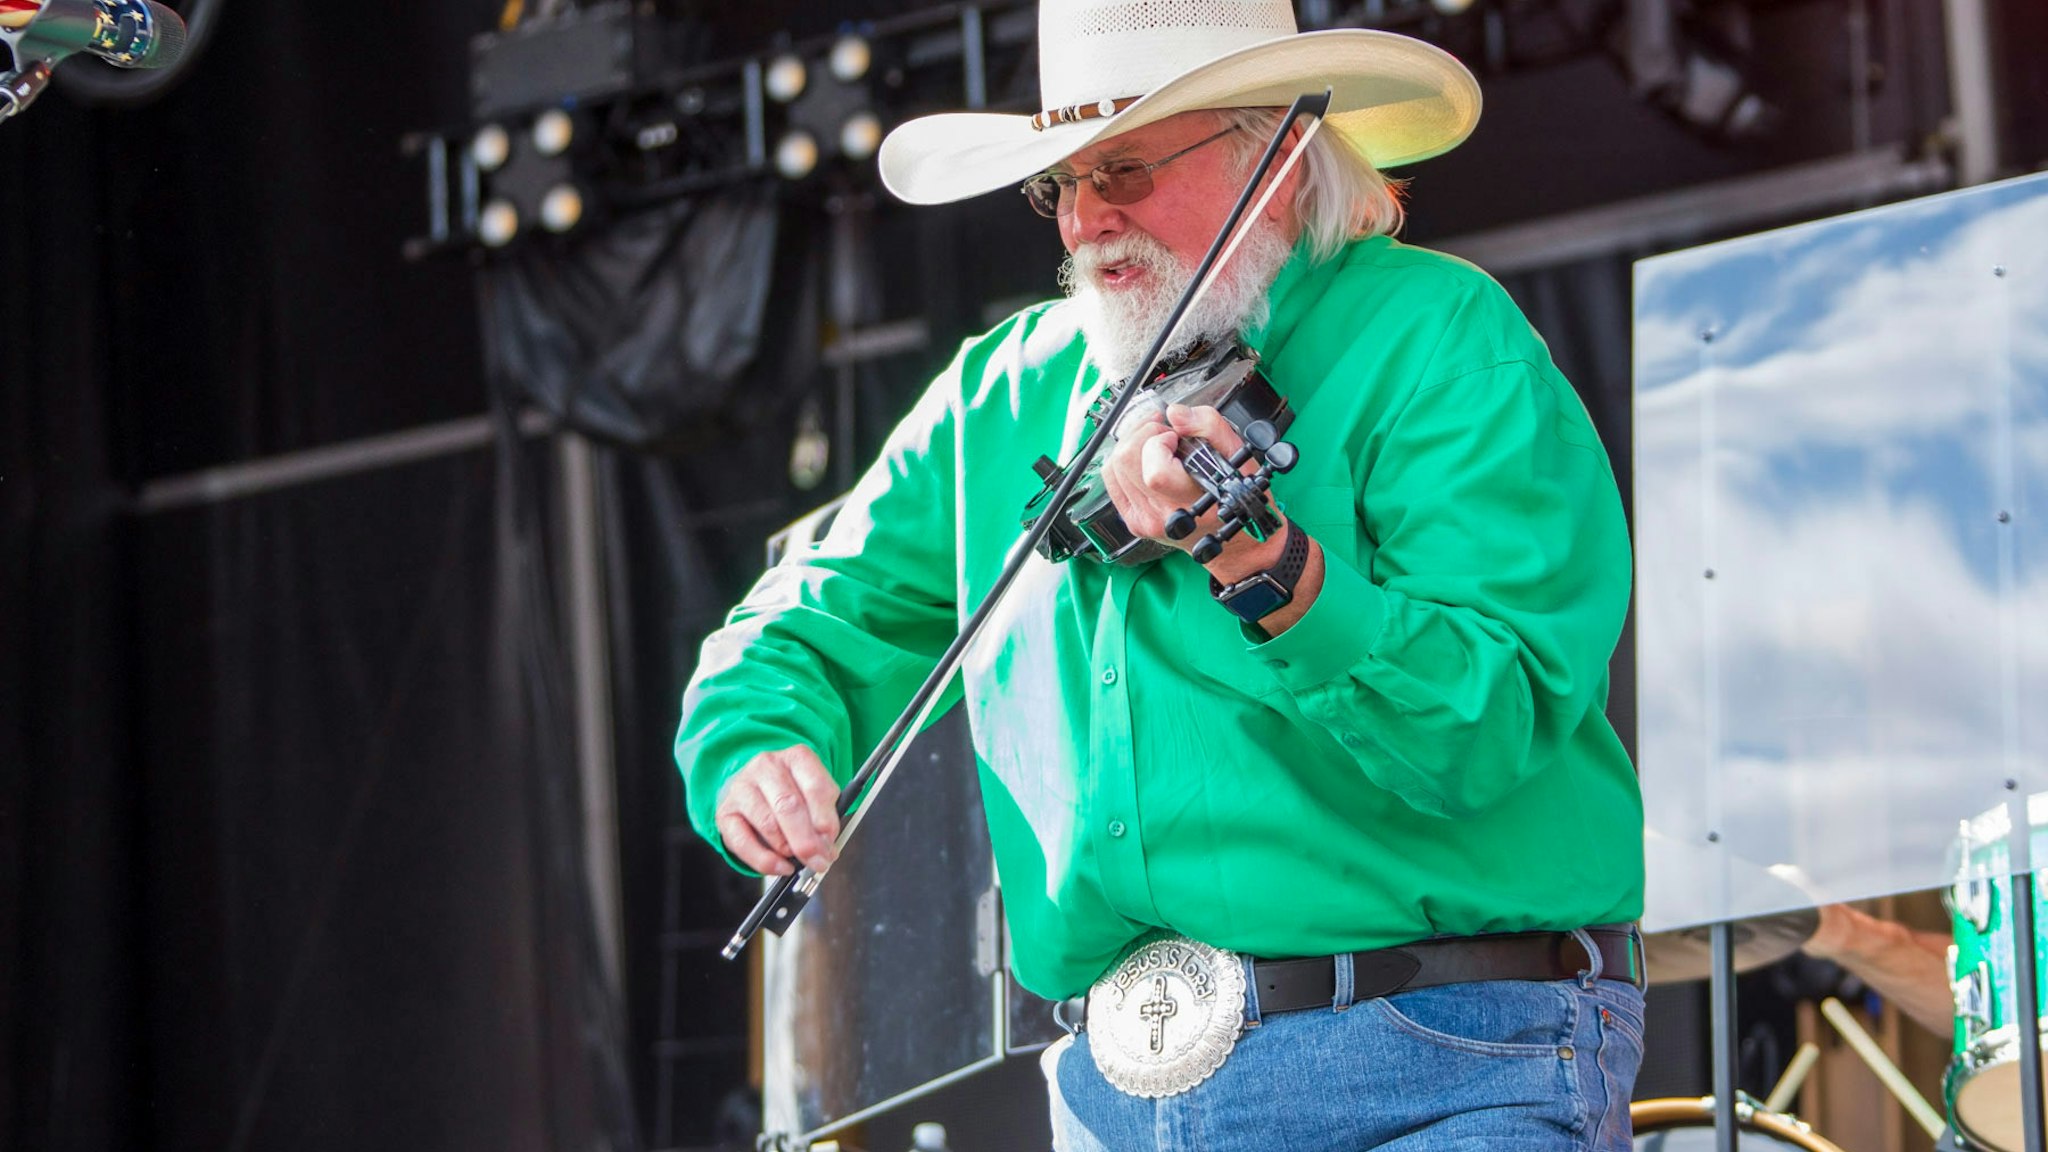 The grave of country legend Charlie Daniels, who died two years ago, has been repeatedly vandalized